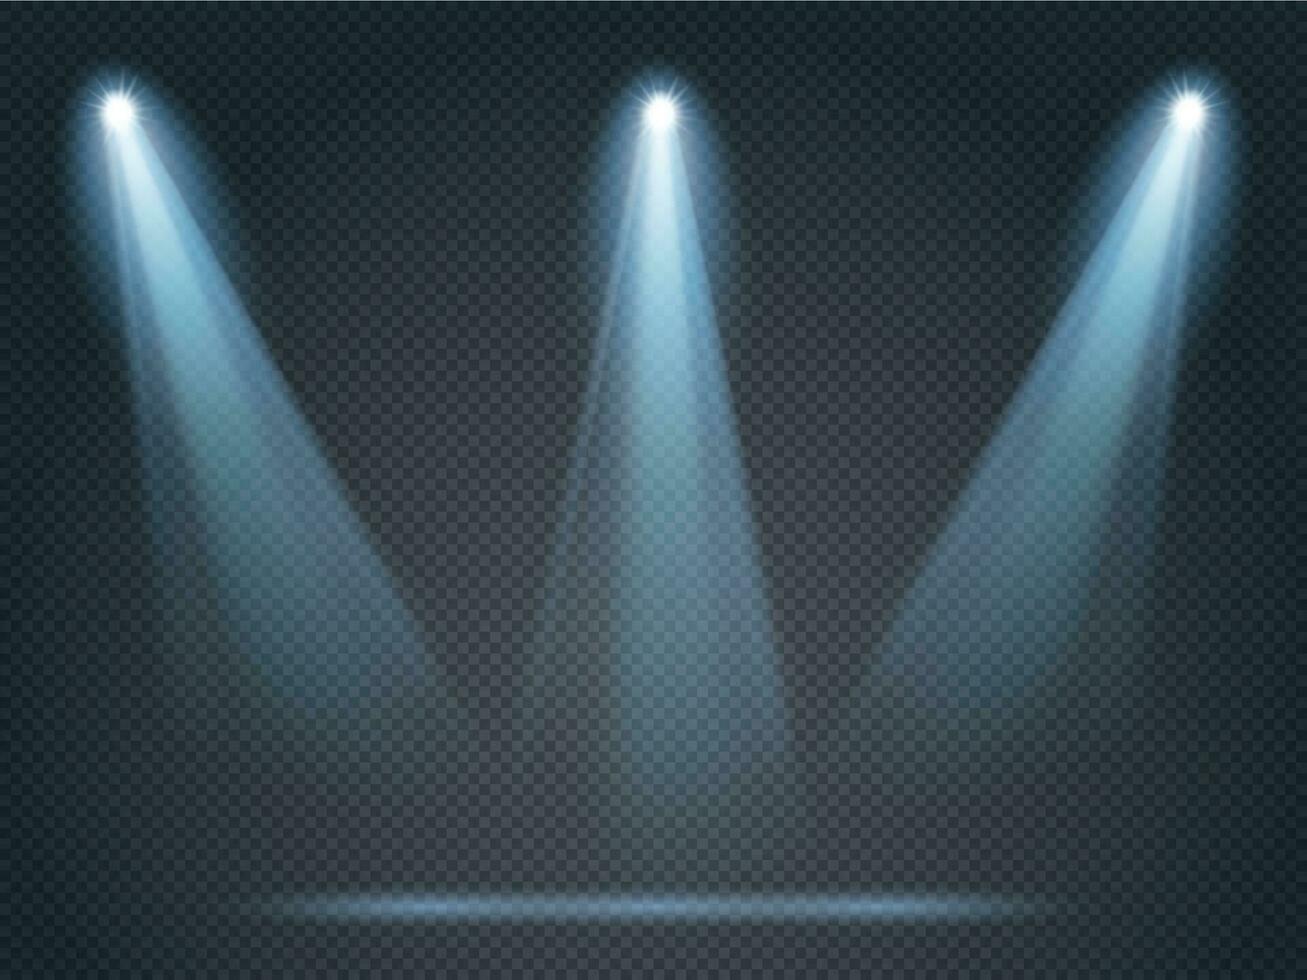 Floodlight shining with white light on corners and middle for stage, scene or podium. Illumination from projector vector